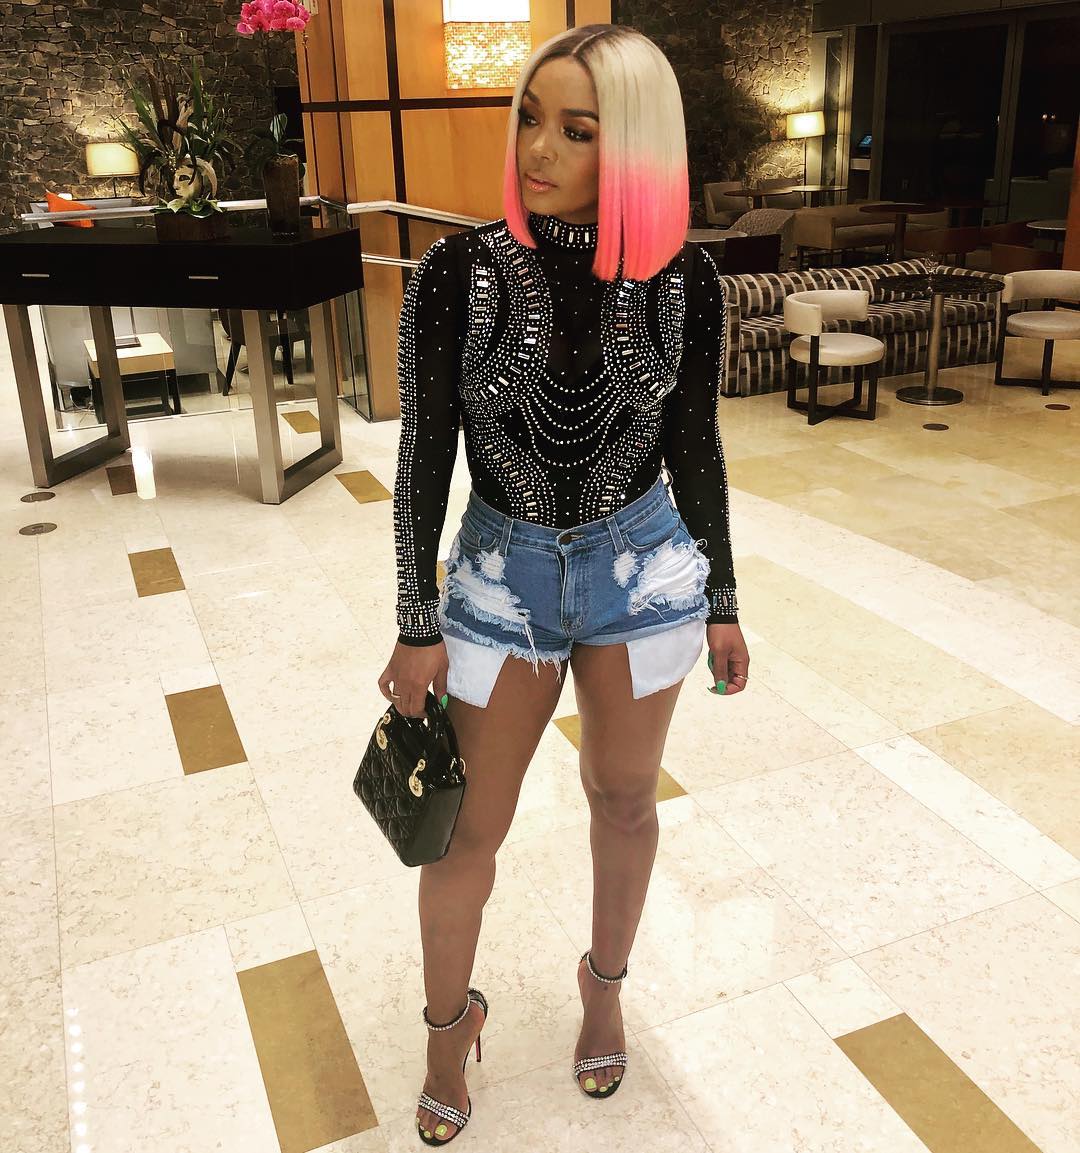 rasheeda-frost-shows-off-her-generous-curves-in-this-outfit